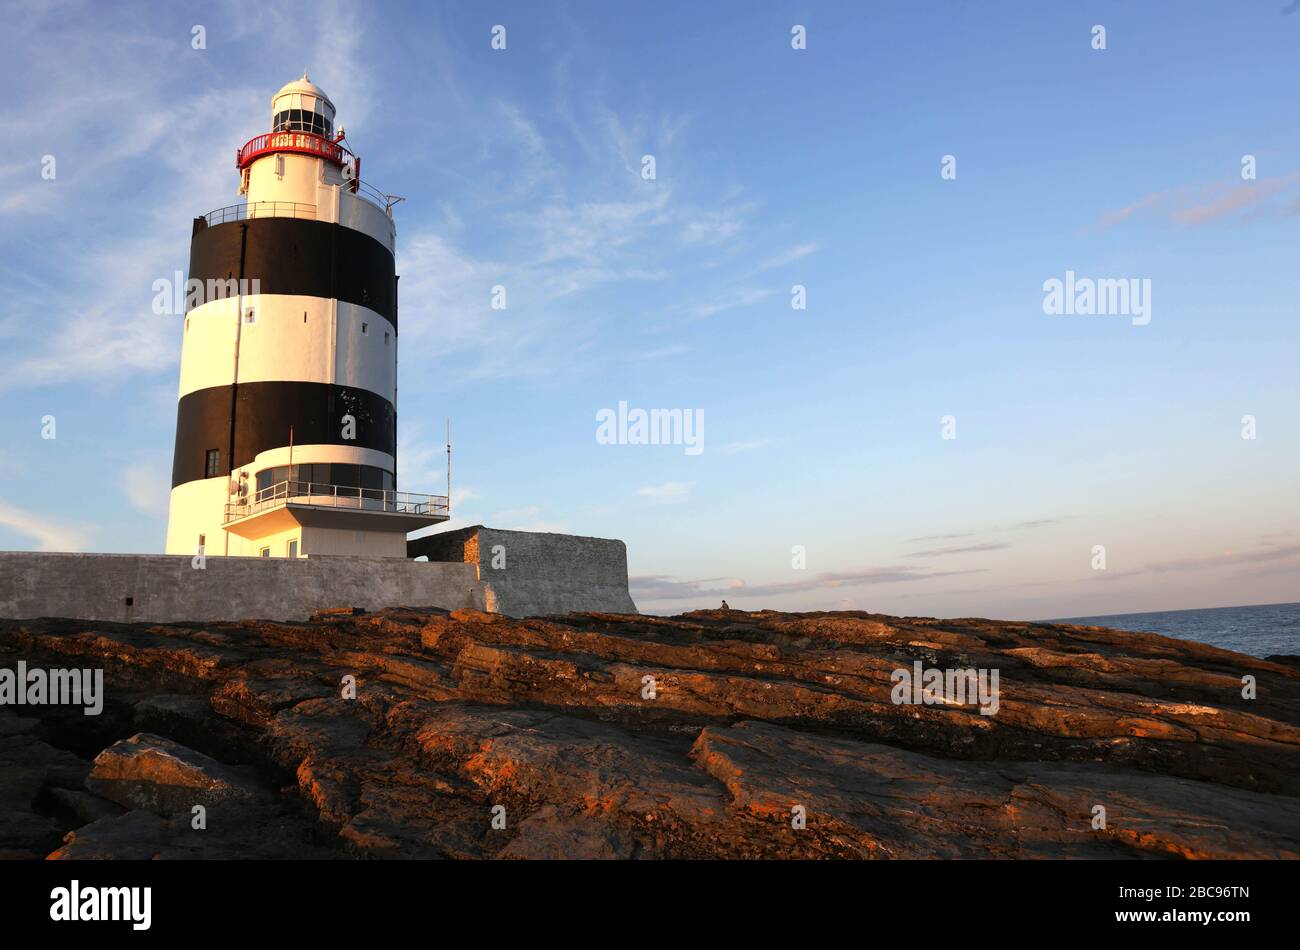 Hook Head Lighthouse is situated at the tip of the Hook Peninsula in County Wexford, in Ireland. It is one of the oldest lighthouses in the world. Stock Photo